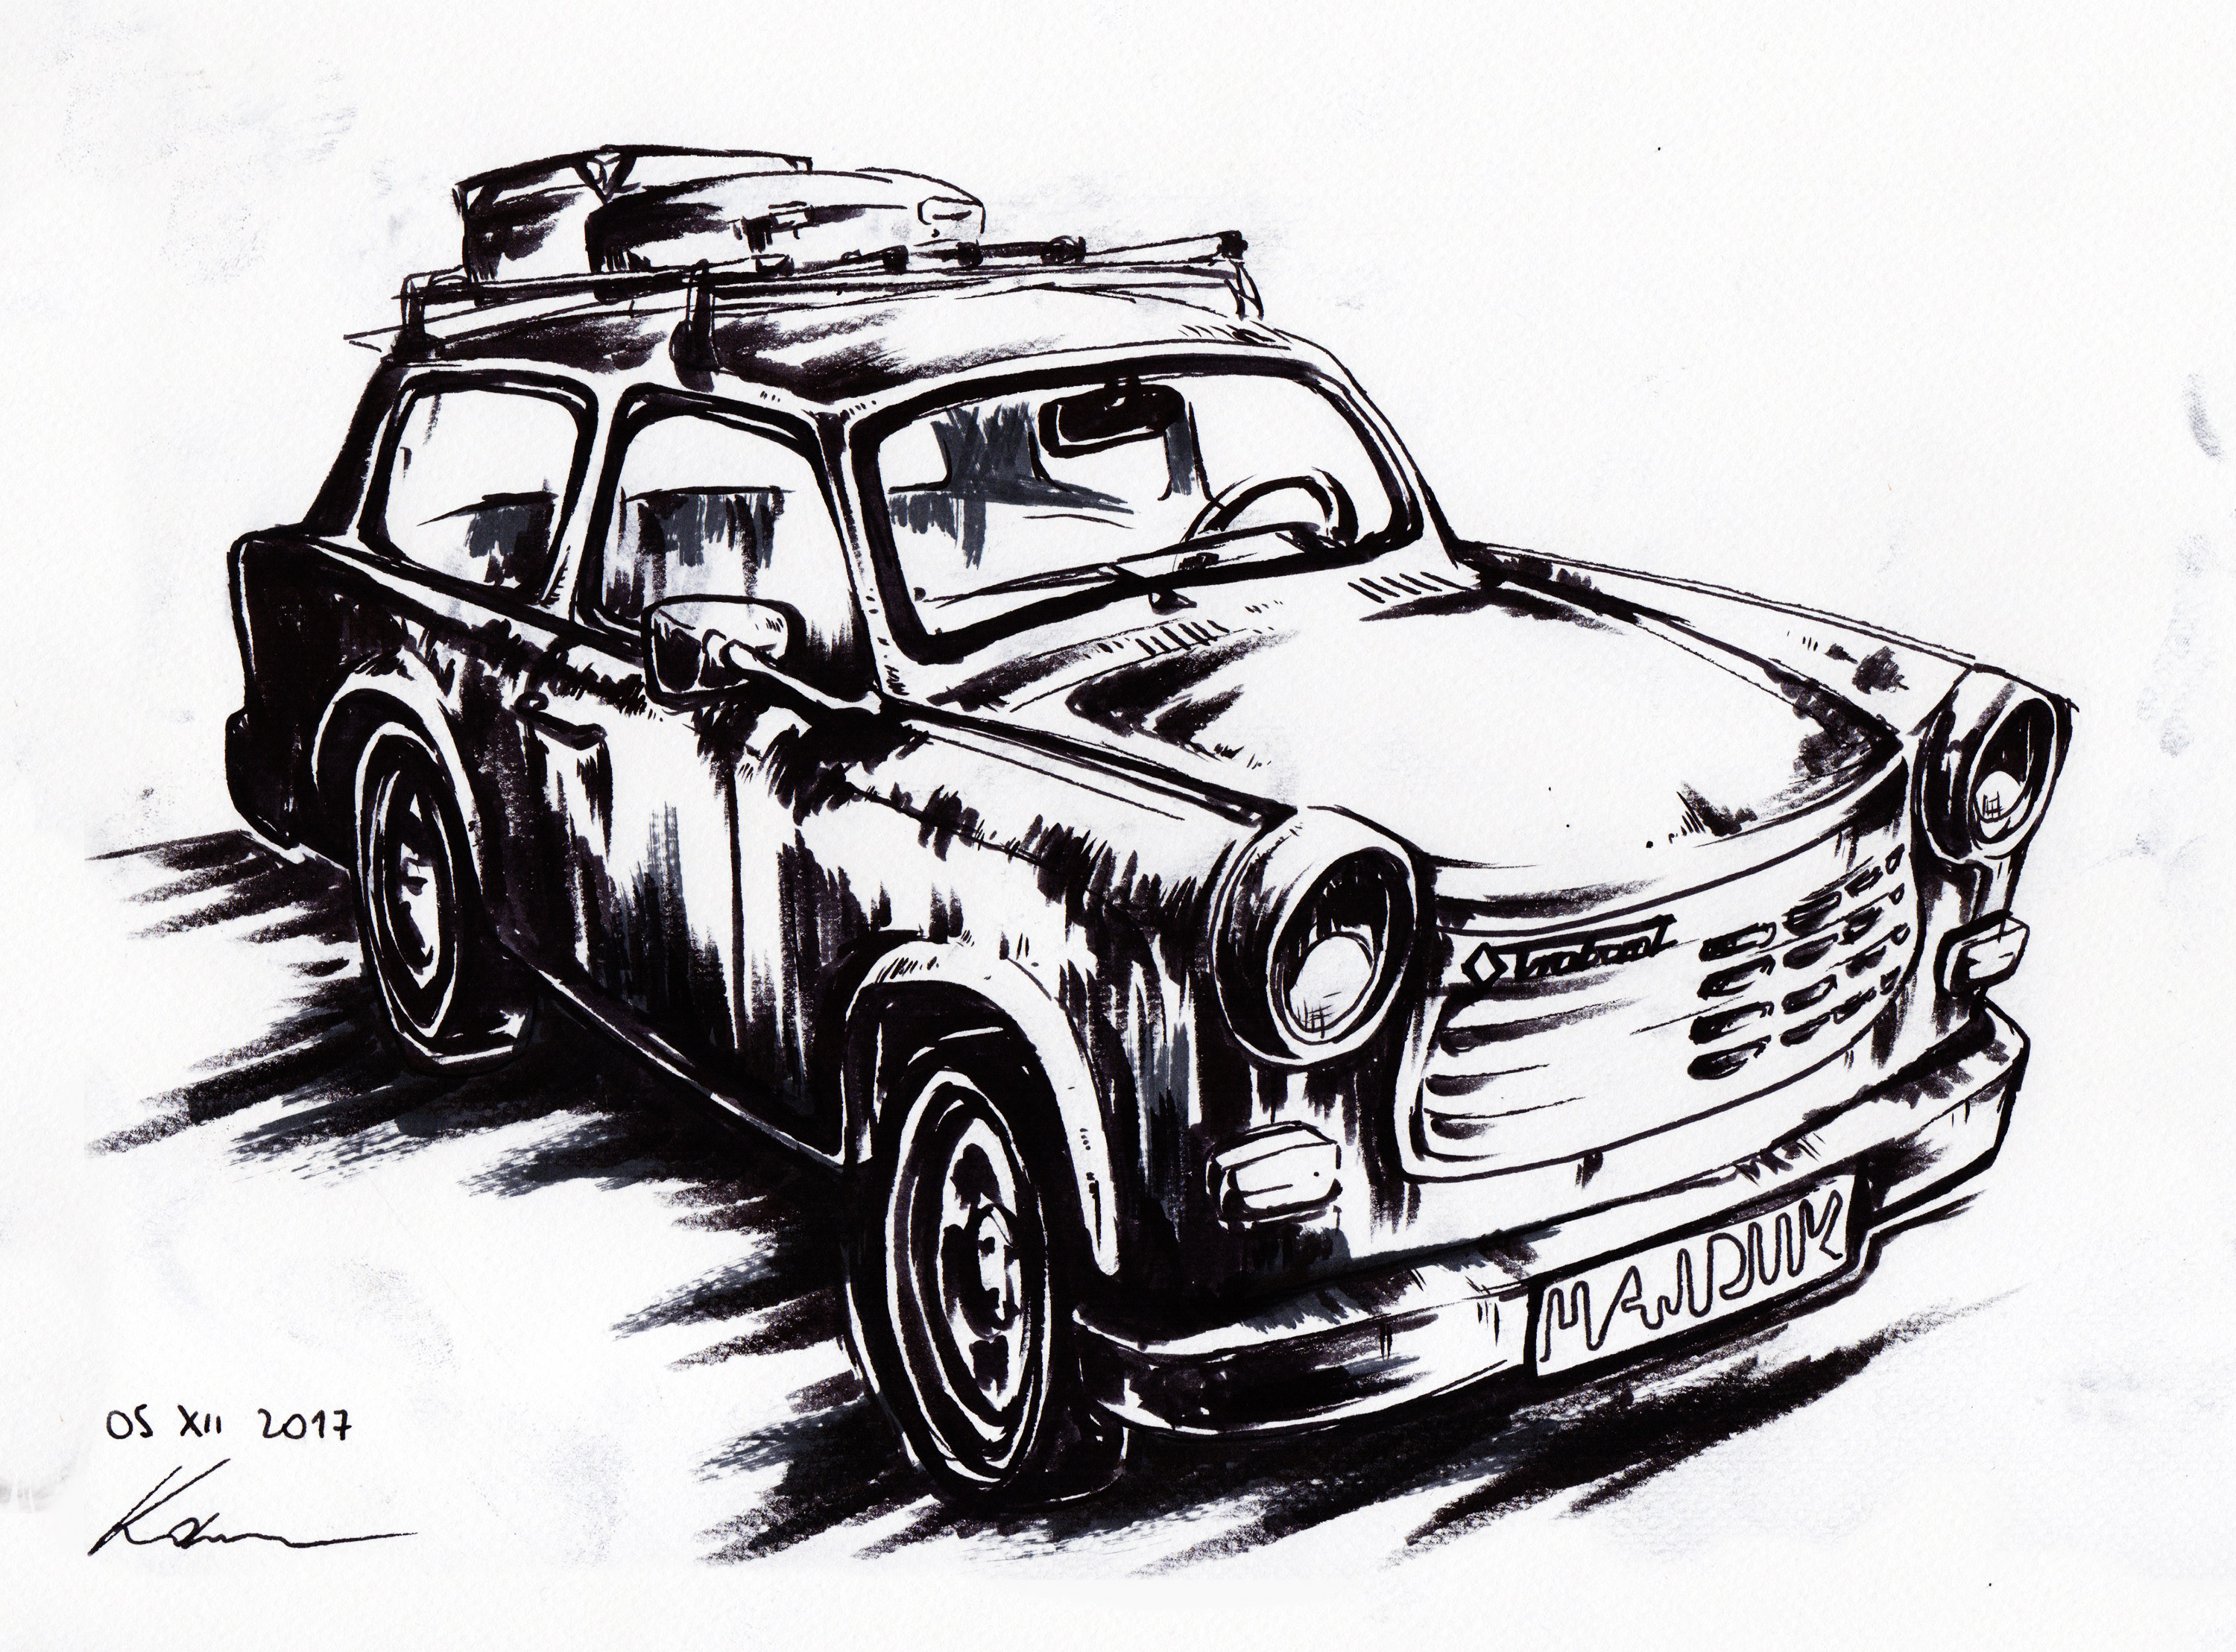 General 3000x2217 car Trabant DDR East Germany vehicle painting monochrome white background artwork